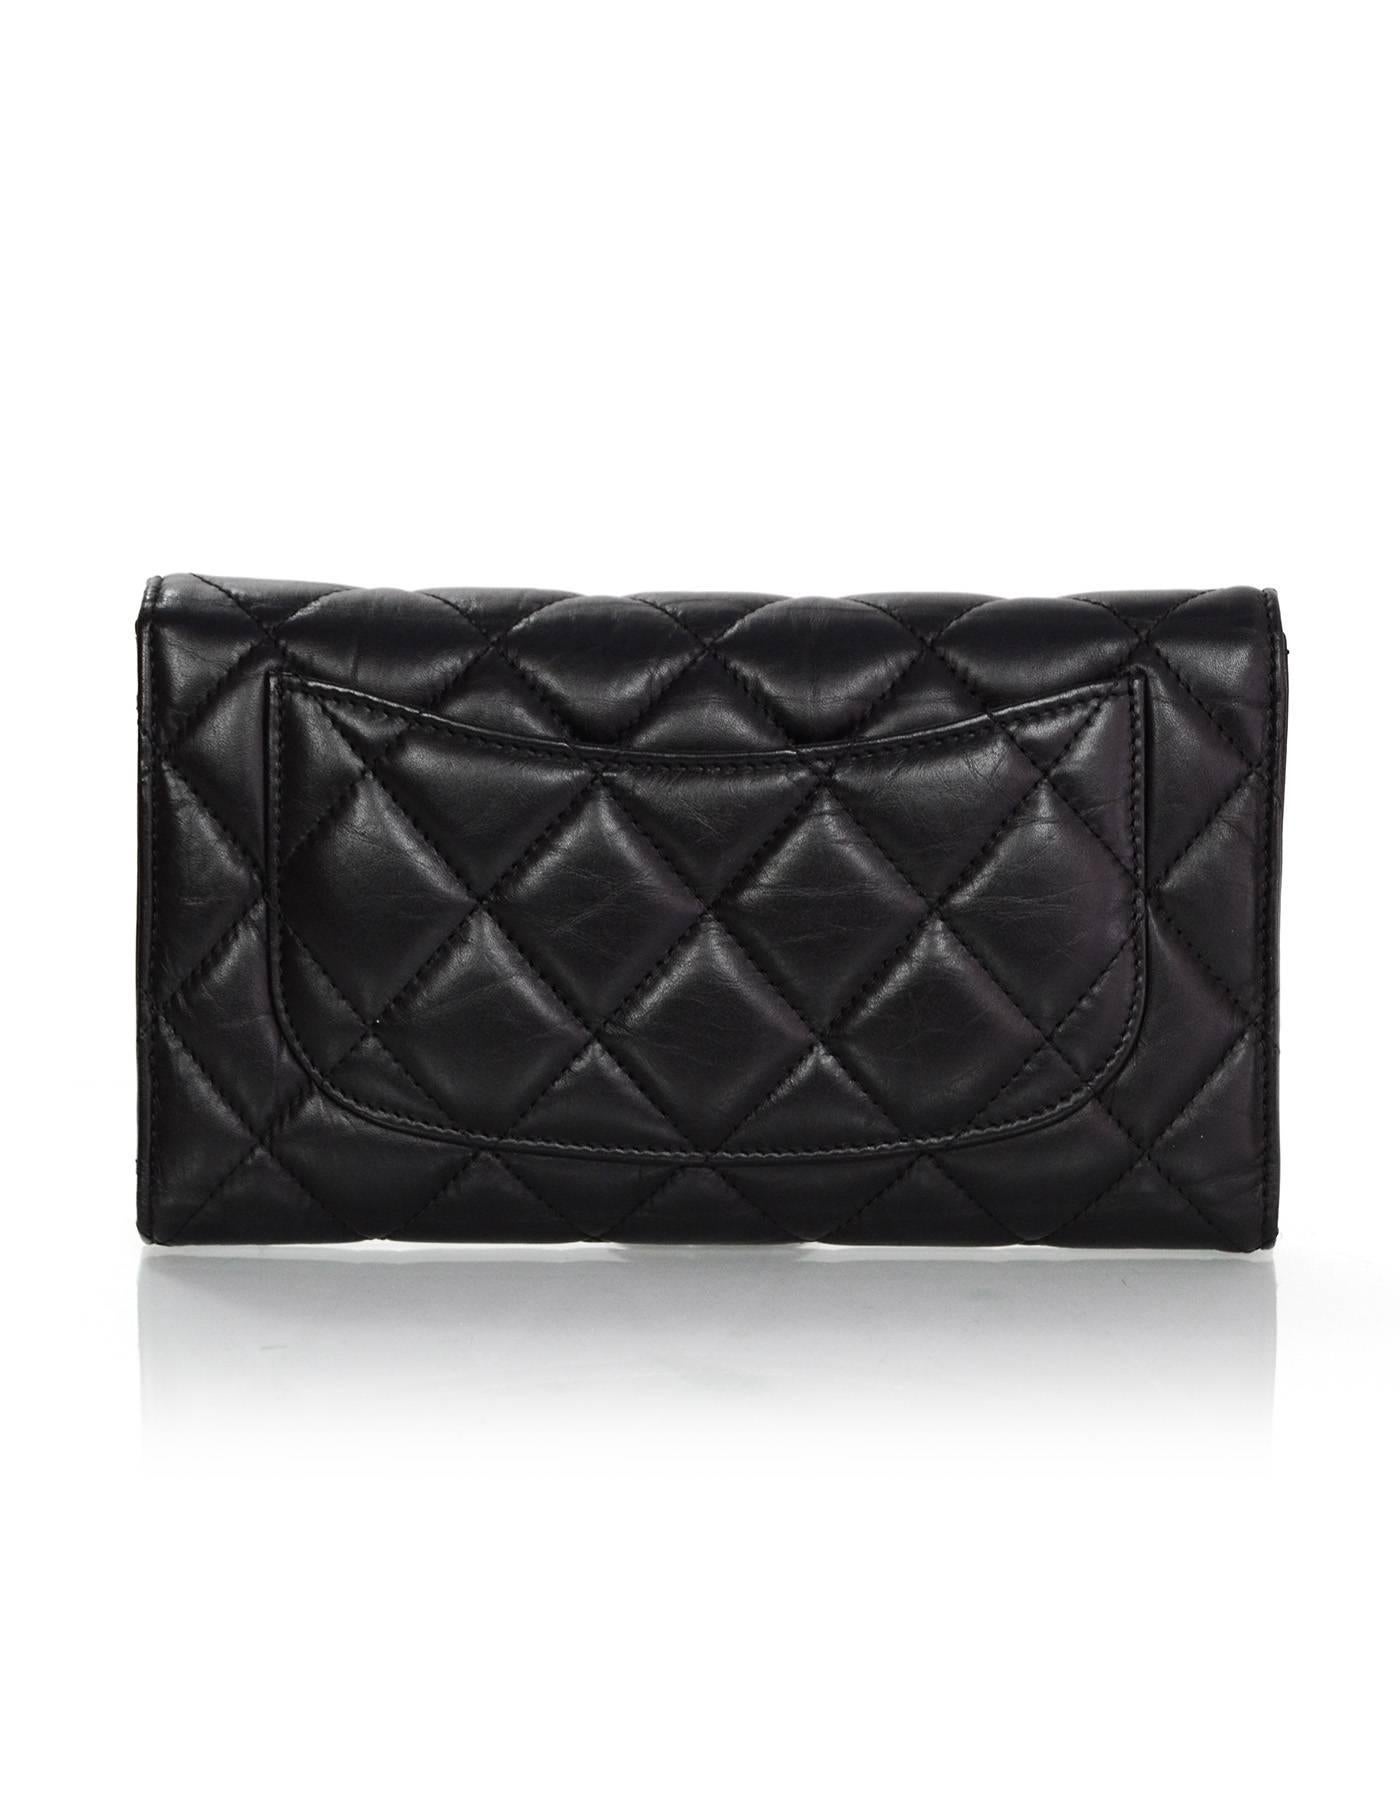 chanel limited edition wallet